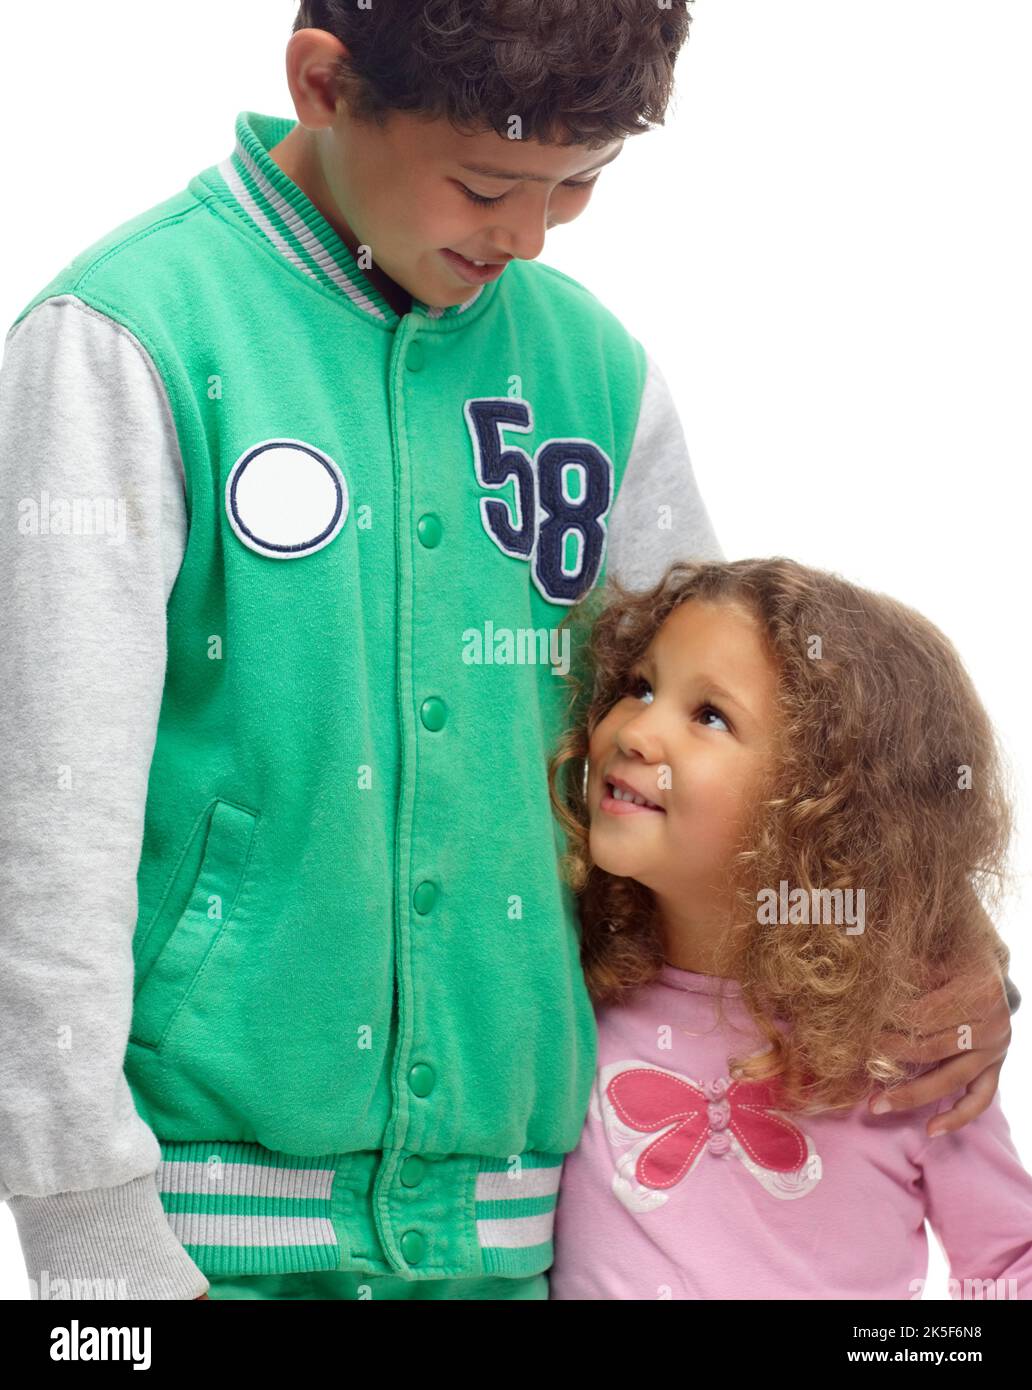 Hes her big brother. Cute siblings standing together and smiling. Stock Photo